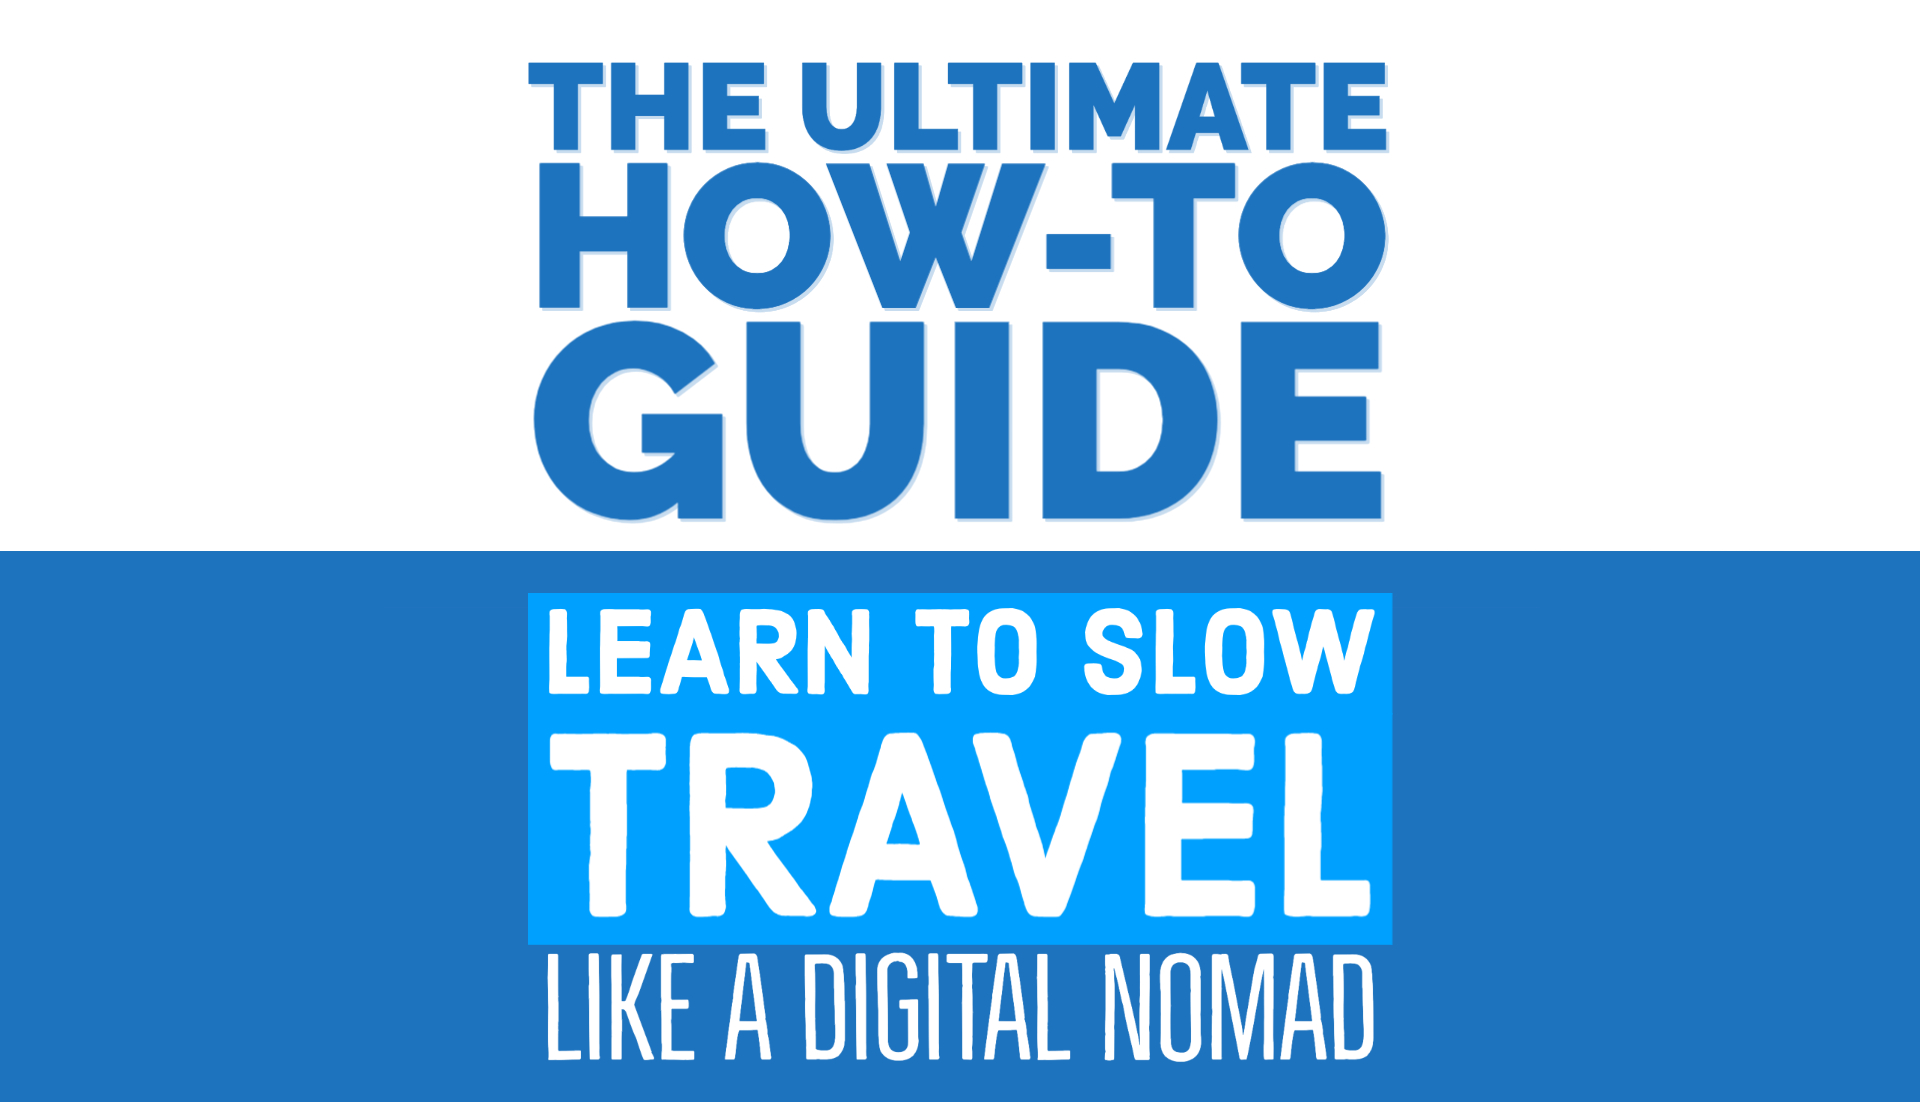 Learn How to slow travel like a digital nomad article